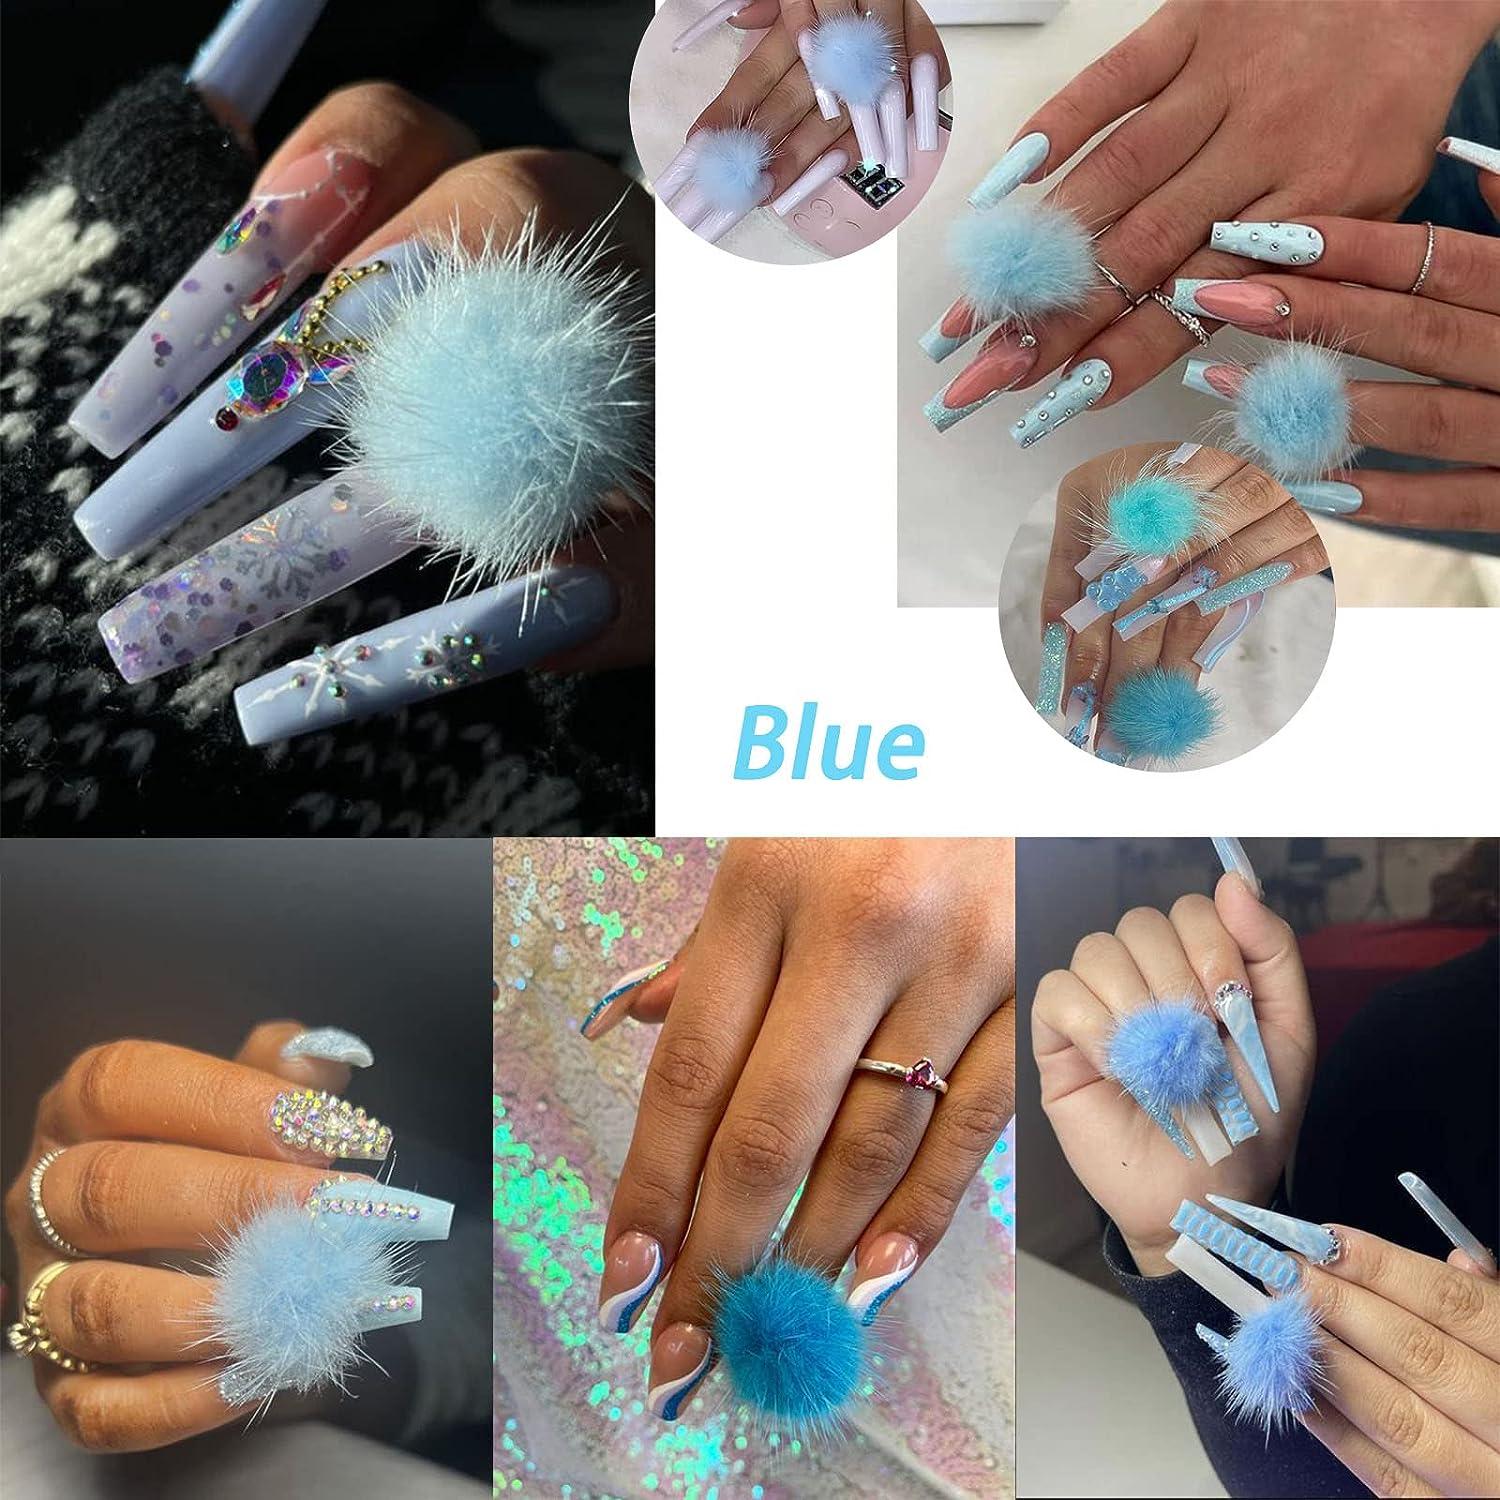 Women are sticking pom-poms on their nails for a fun new look